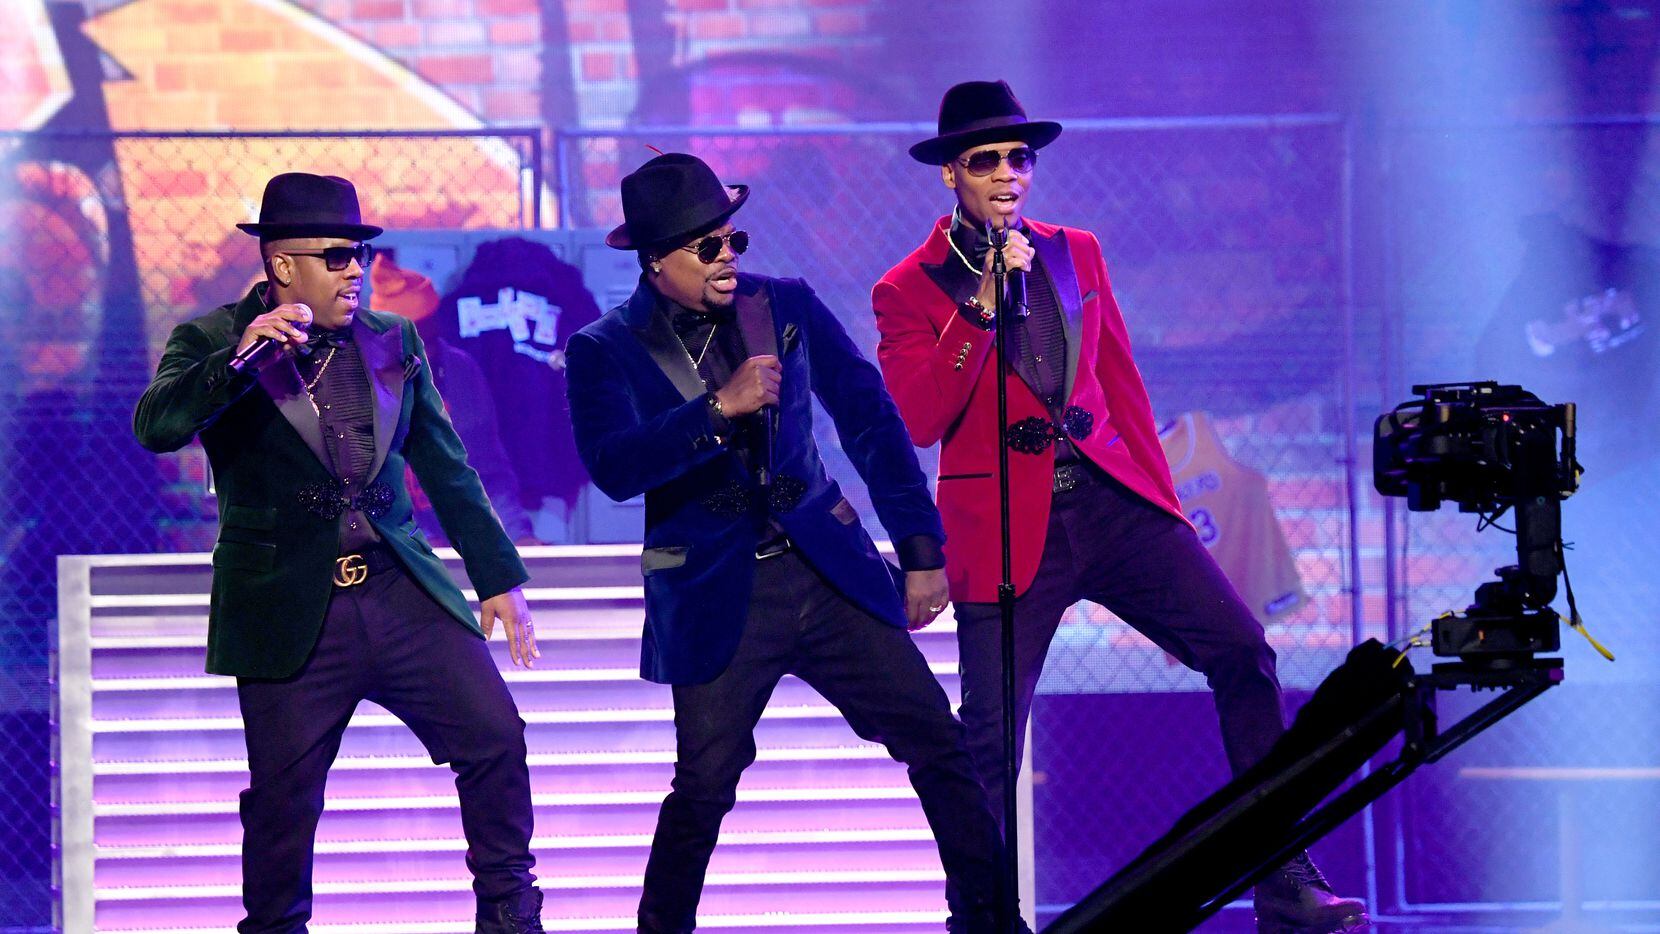 Bell Biv Devoe
LOS ANGELES, CALIFORNIA - NOVEMBER 22: (L-R) In this image released on November 22, Michael Bivins, Ricky Bell, Ronnie DeVoe of Bell Biv DeVoe perform onstage for the 2020 American Music Awards at Microsoft Theater on November 22, 2020 in Los Angeles, California. (Photo by Kevin Mazur/AMA2020/Getty Images for dcp)